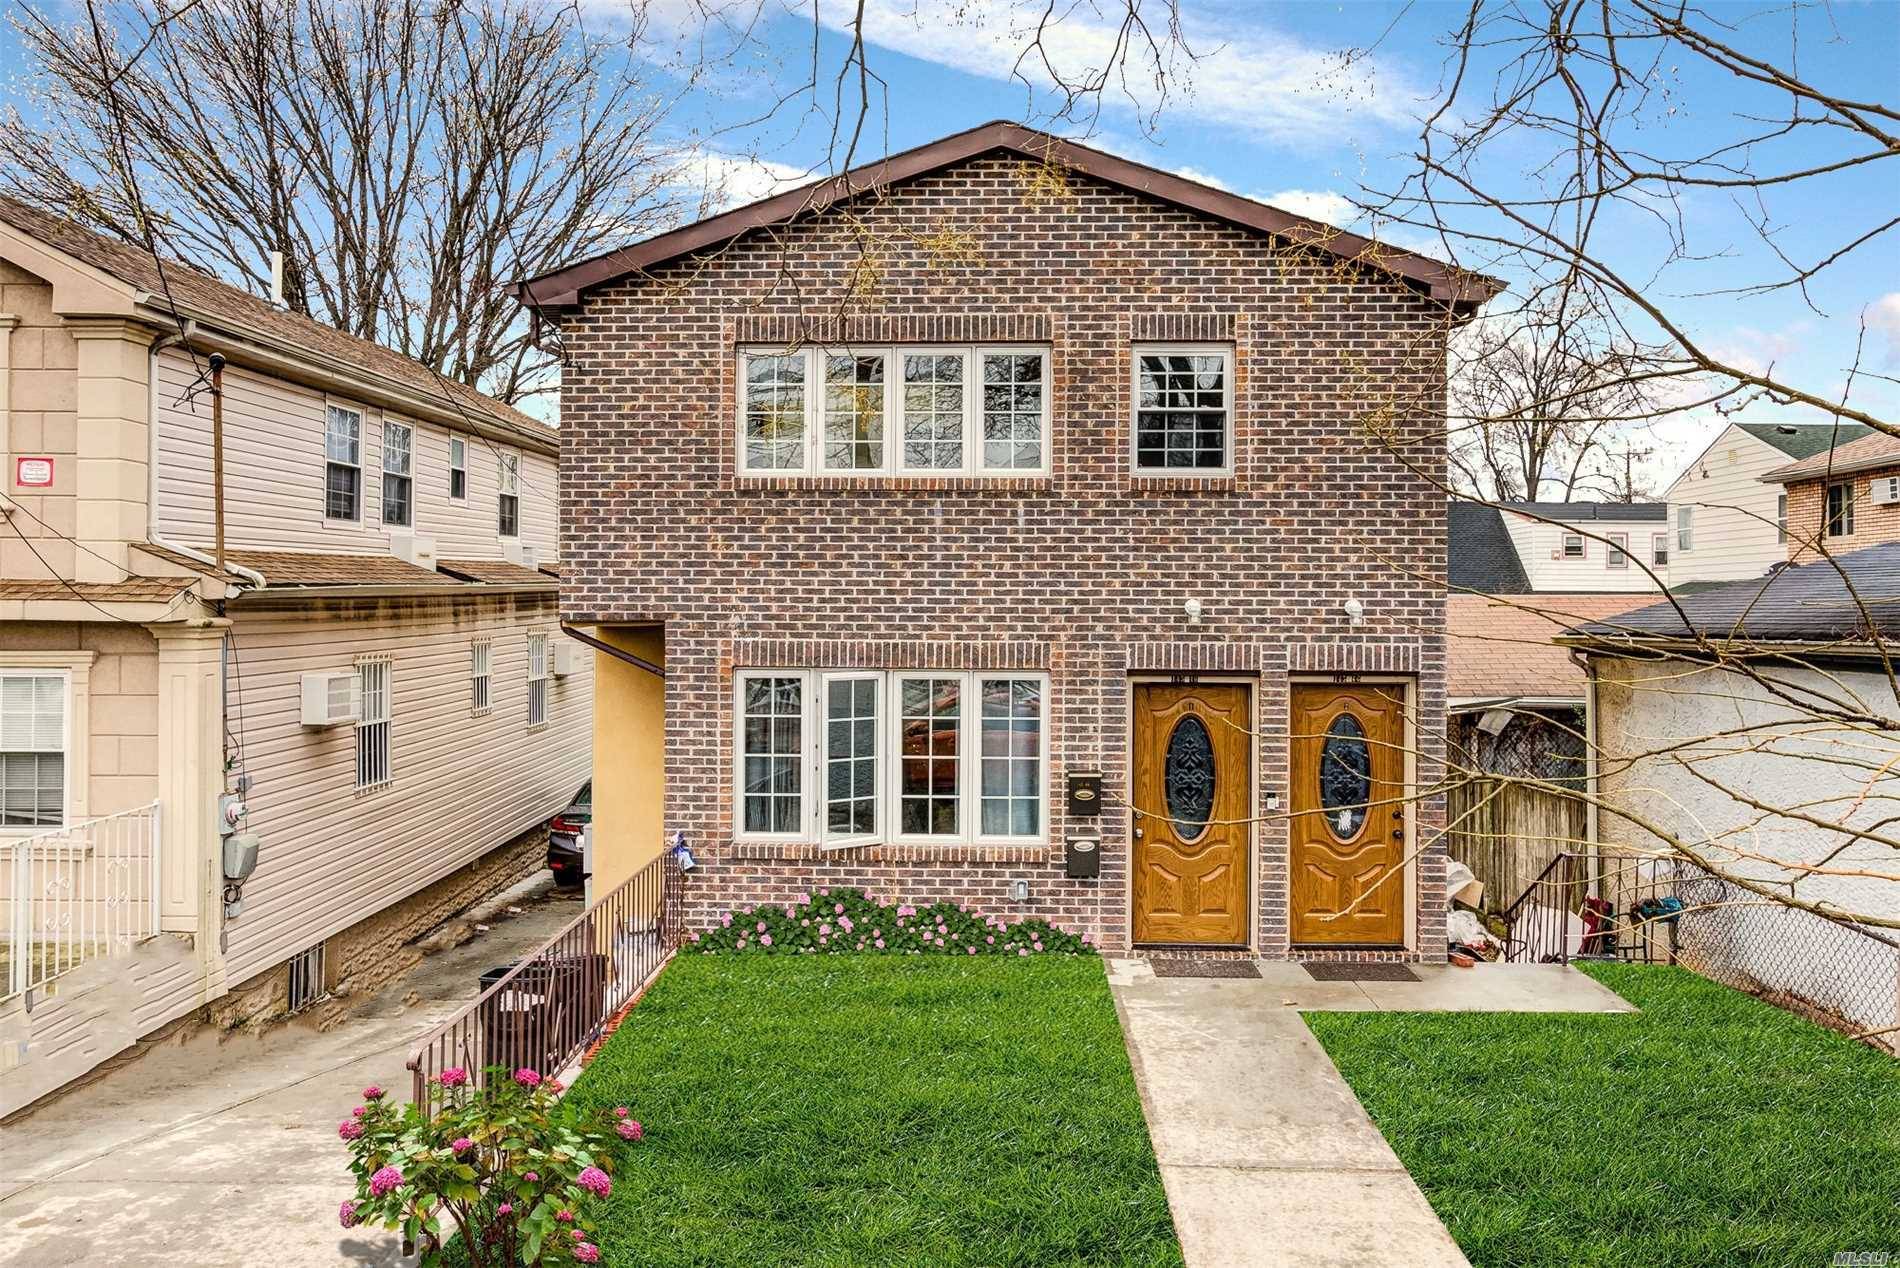 2 Family Newly Constructed Home Located In The Very Well Known Neighborhood Of Springfield Gardens, Queens New York.